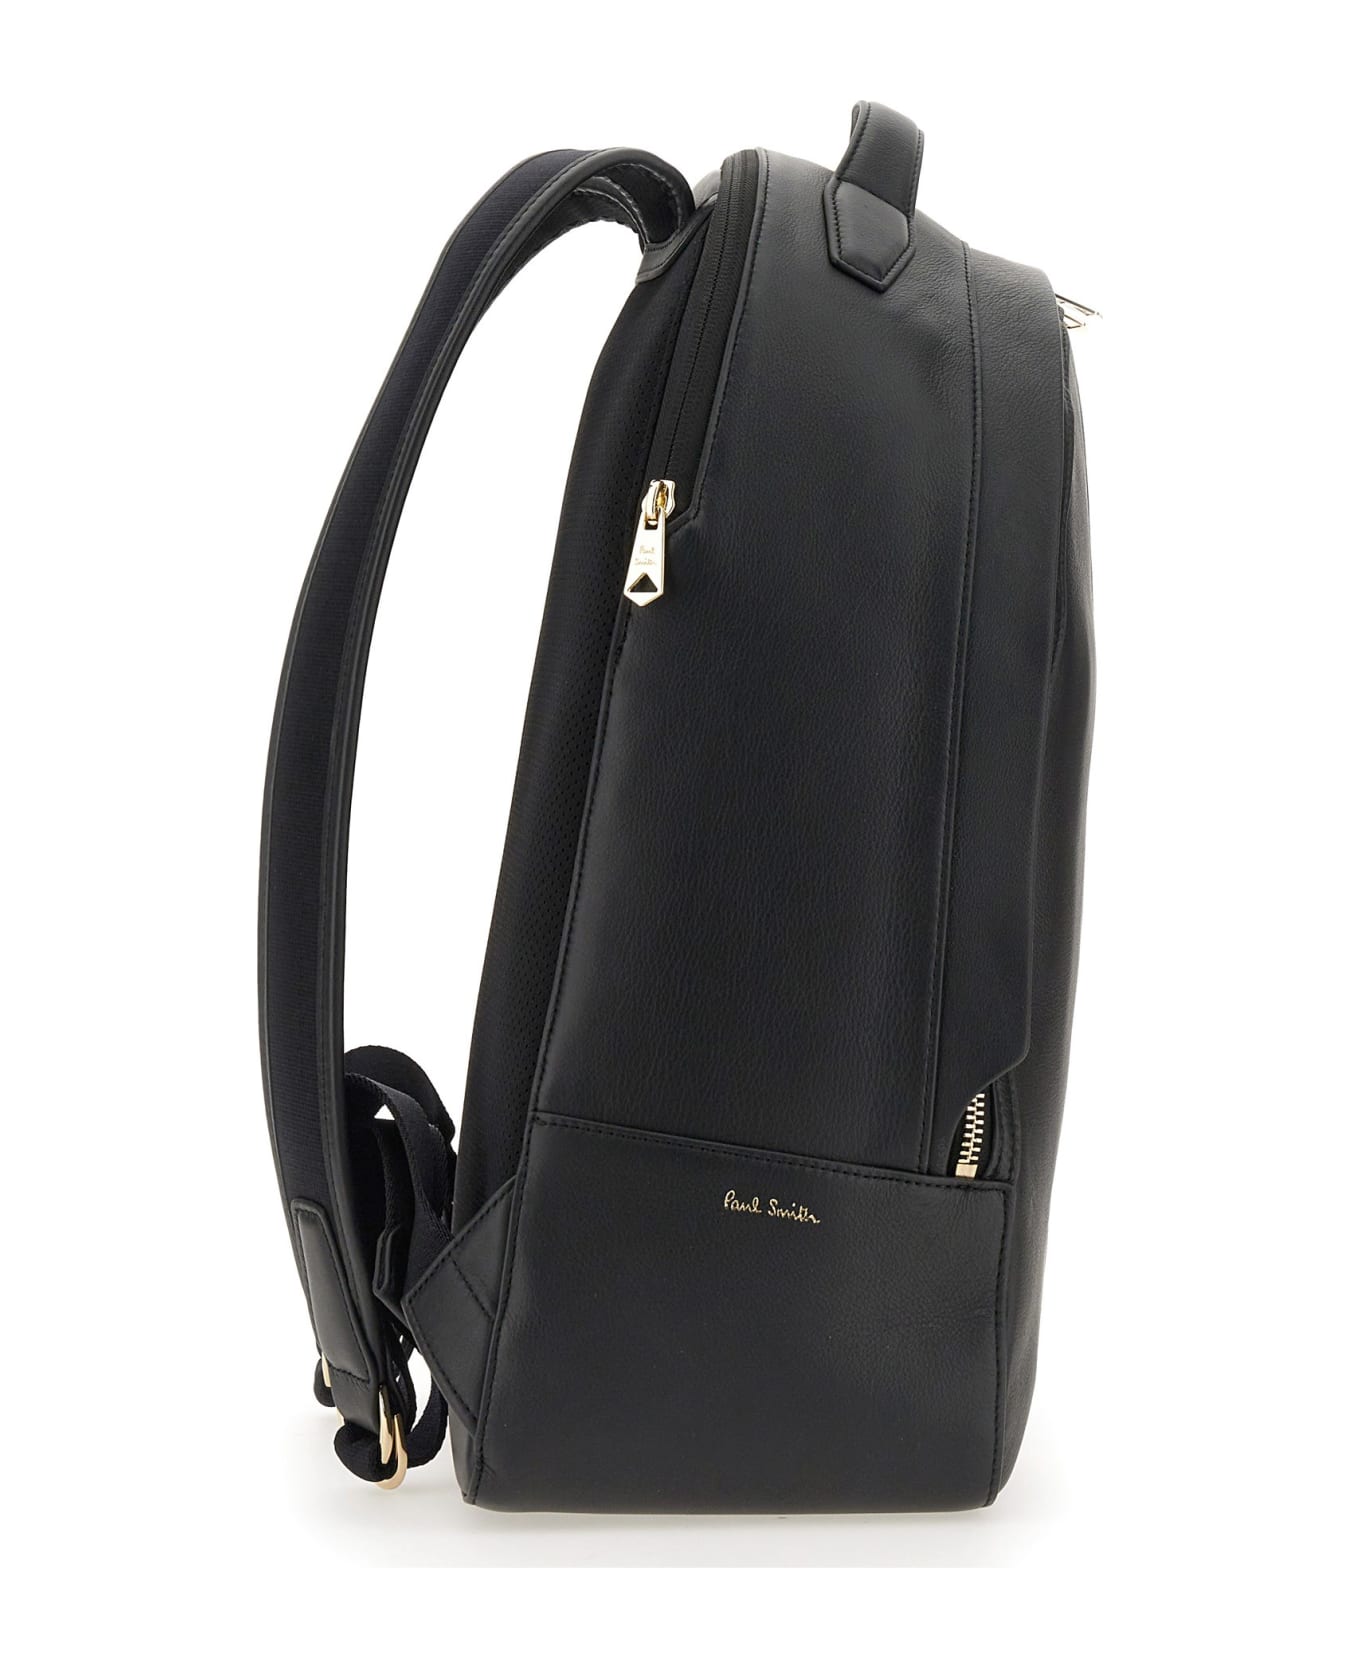 Paul Smith Signature Stripe Backpack - Black バックパック